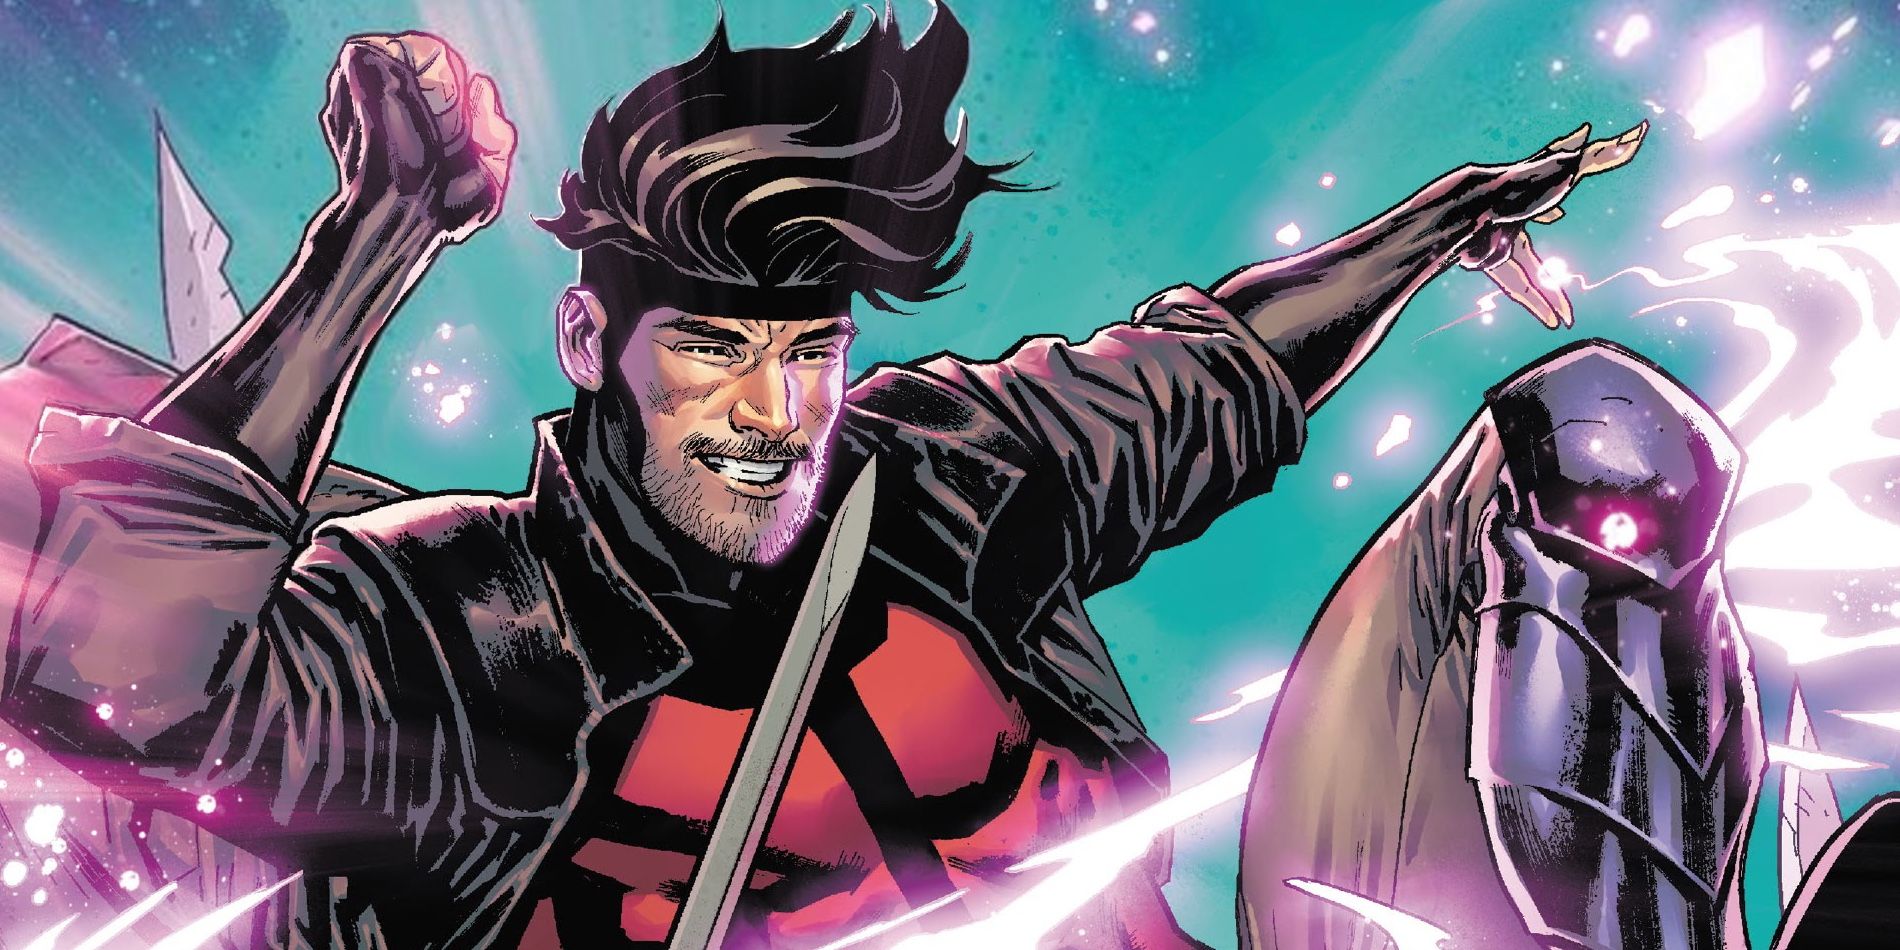 Gambit on the cover of Knights of X #3.